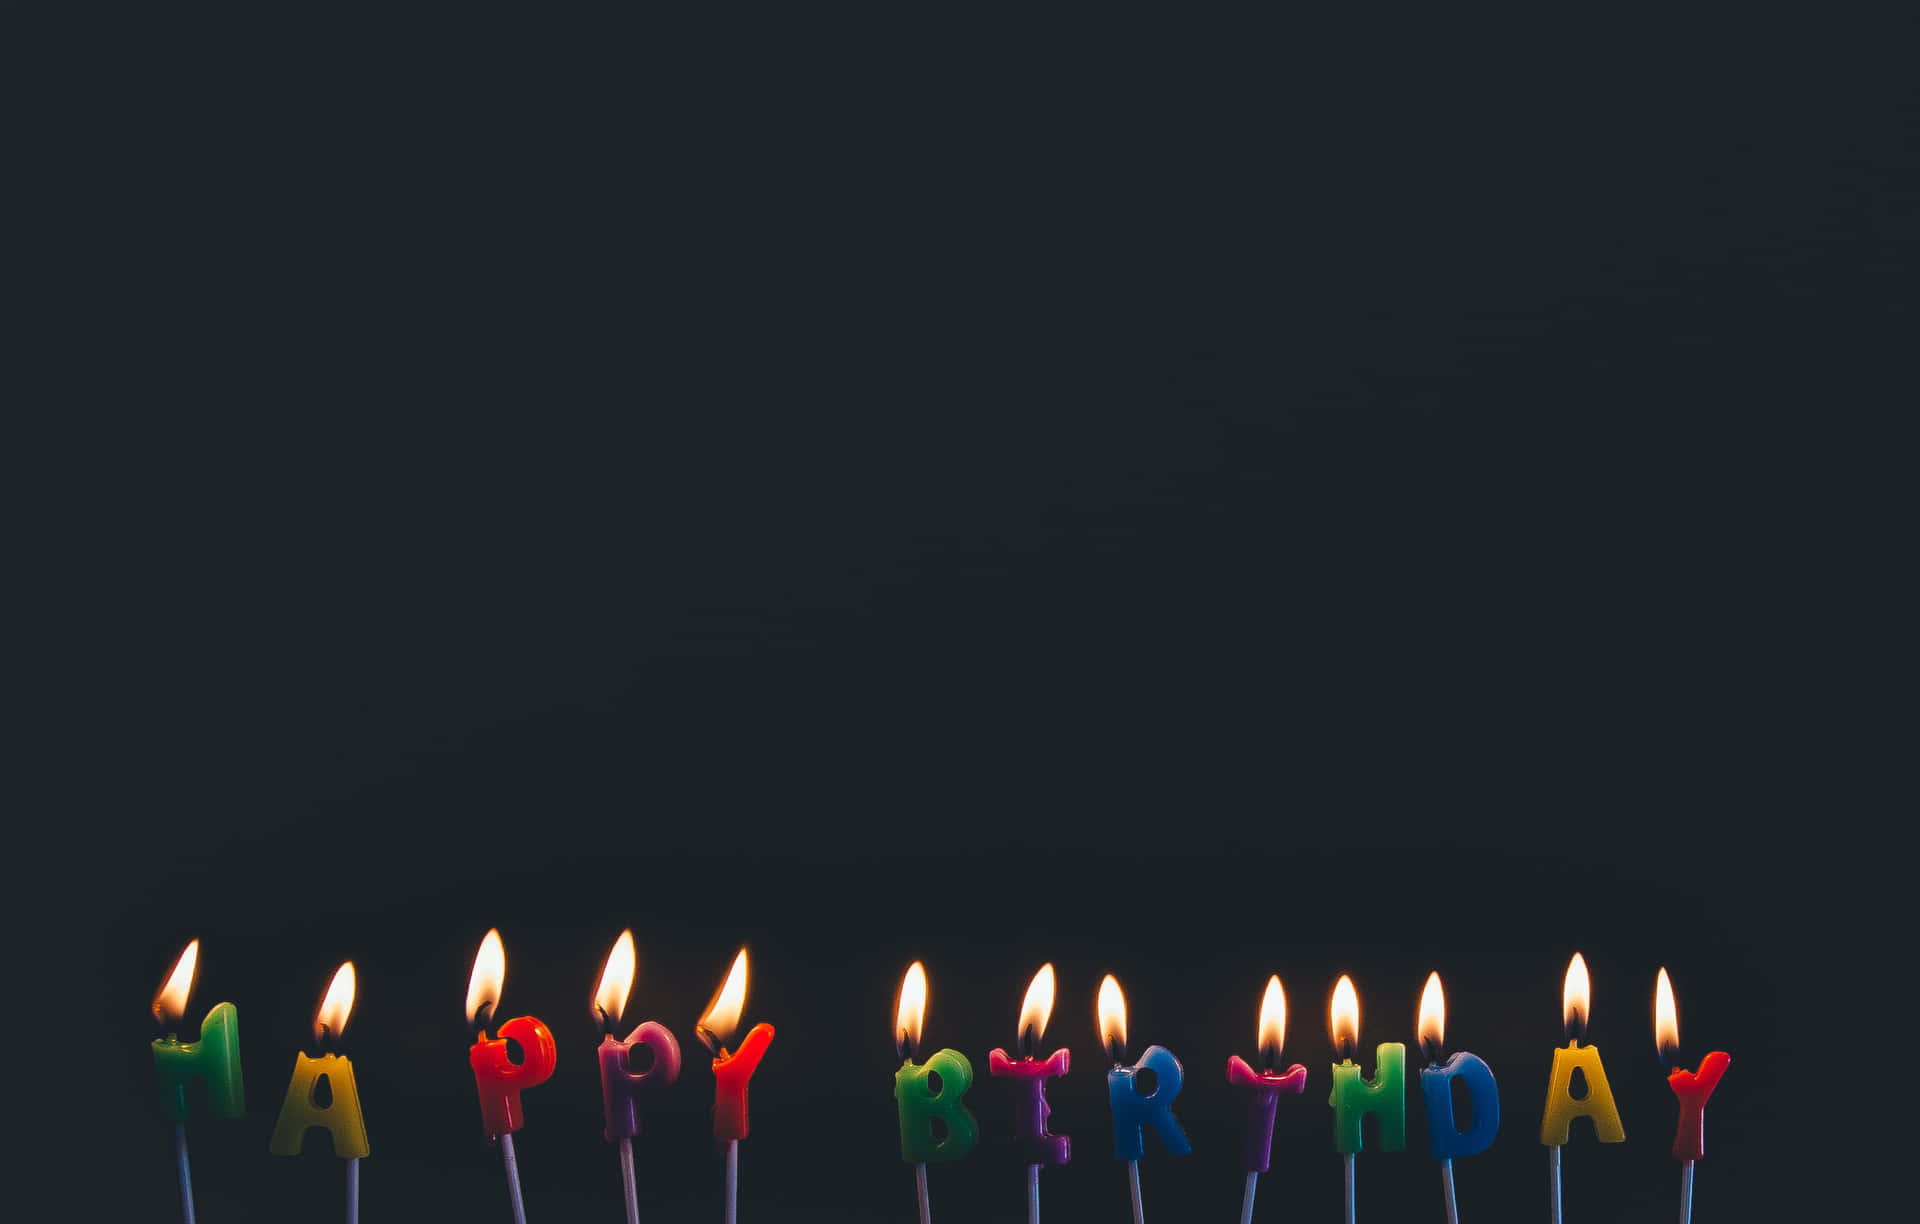 A Group Of Candles With Happy Birthday Written On Them Wallpaper